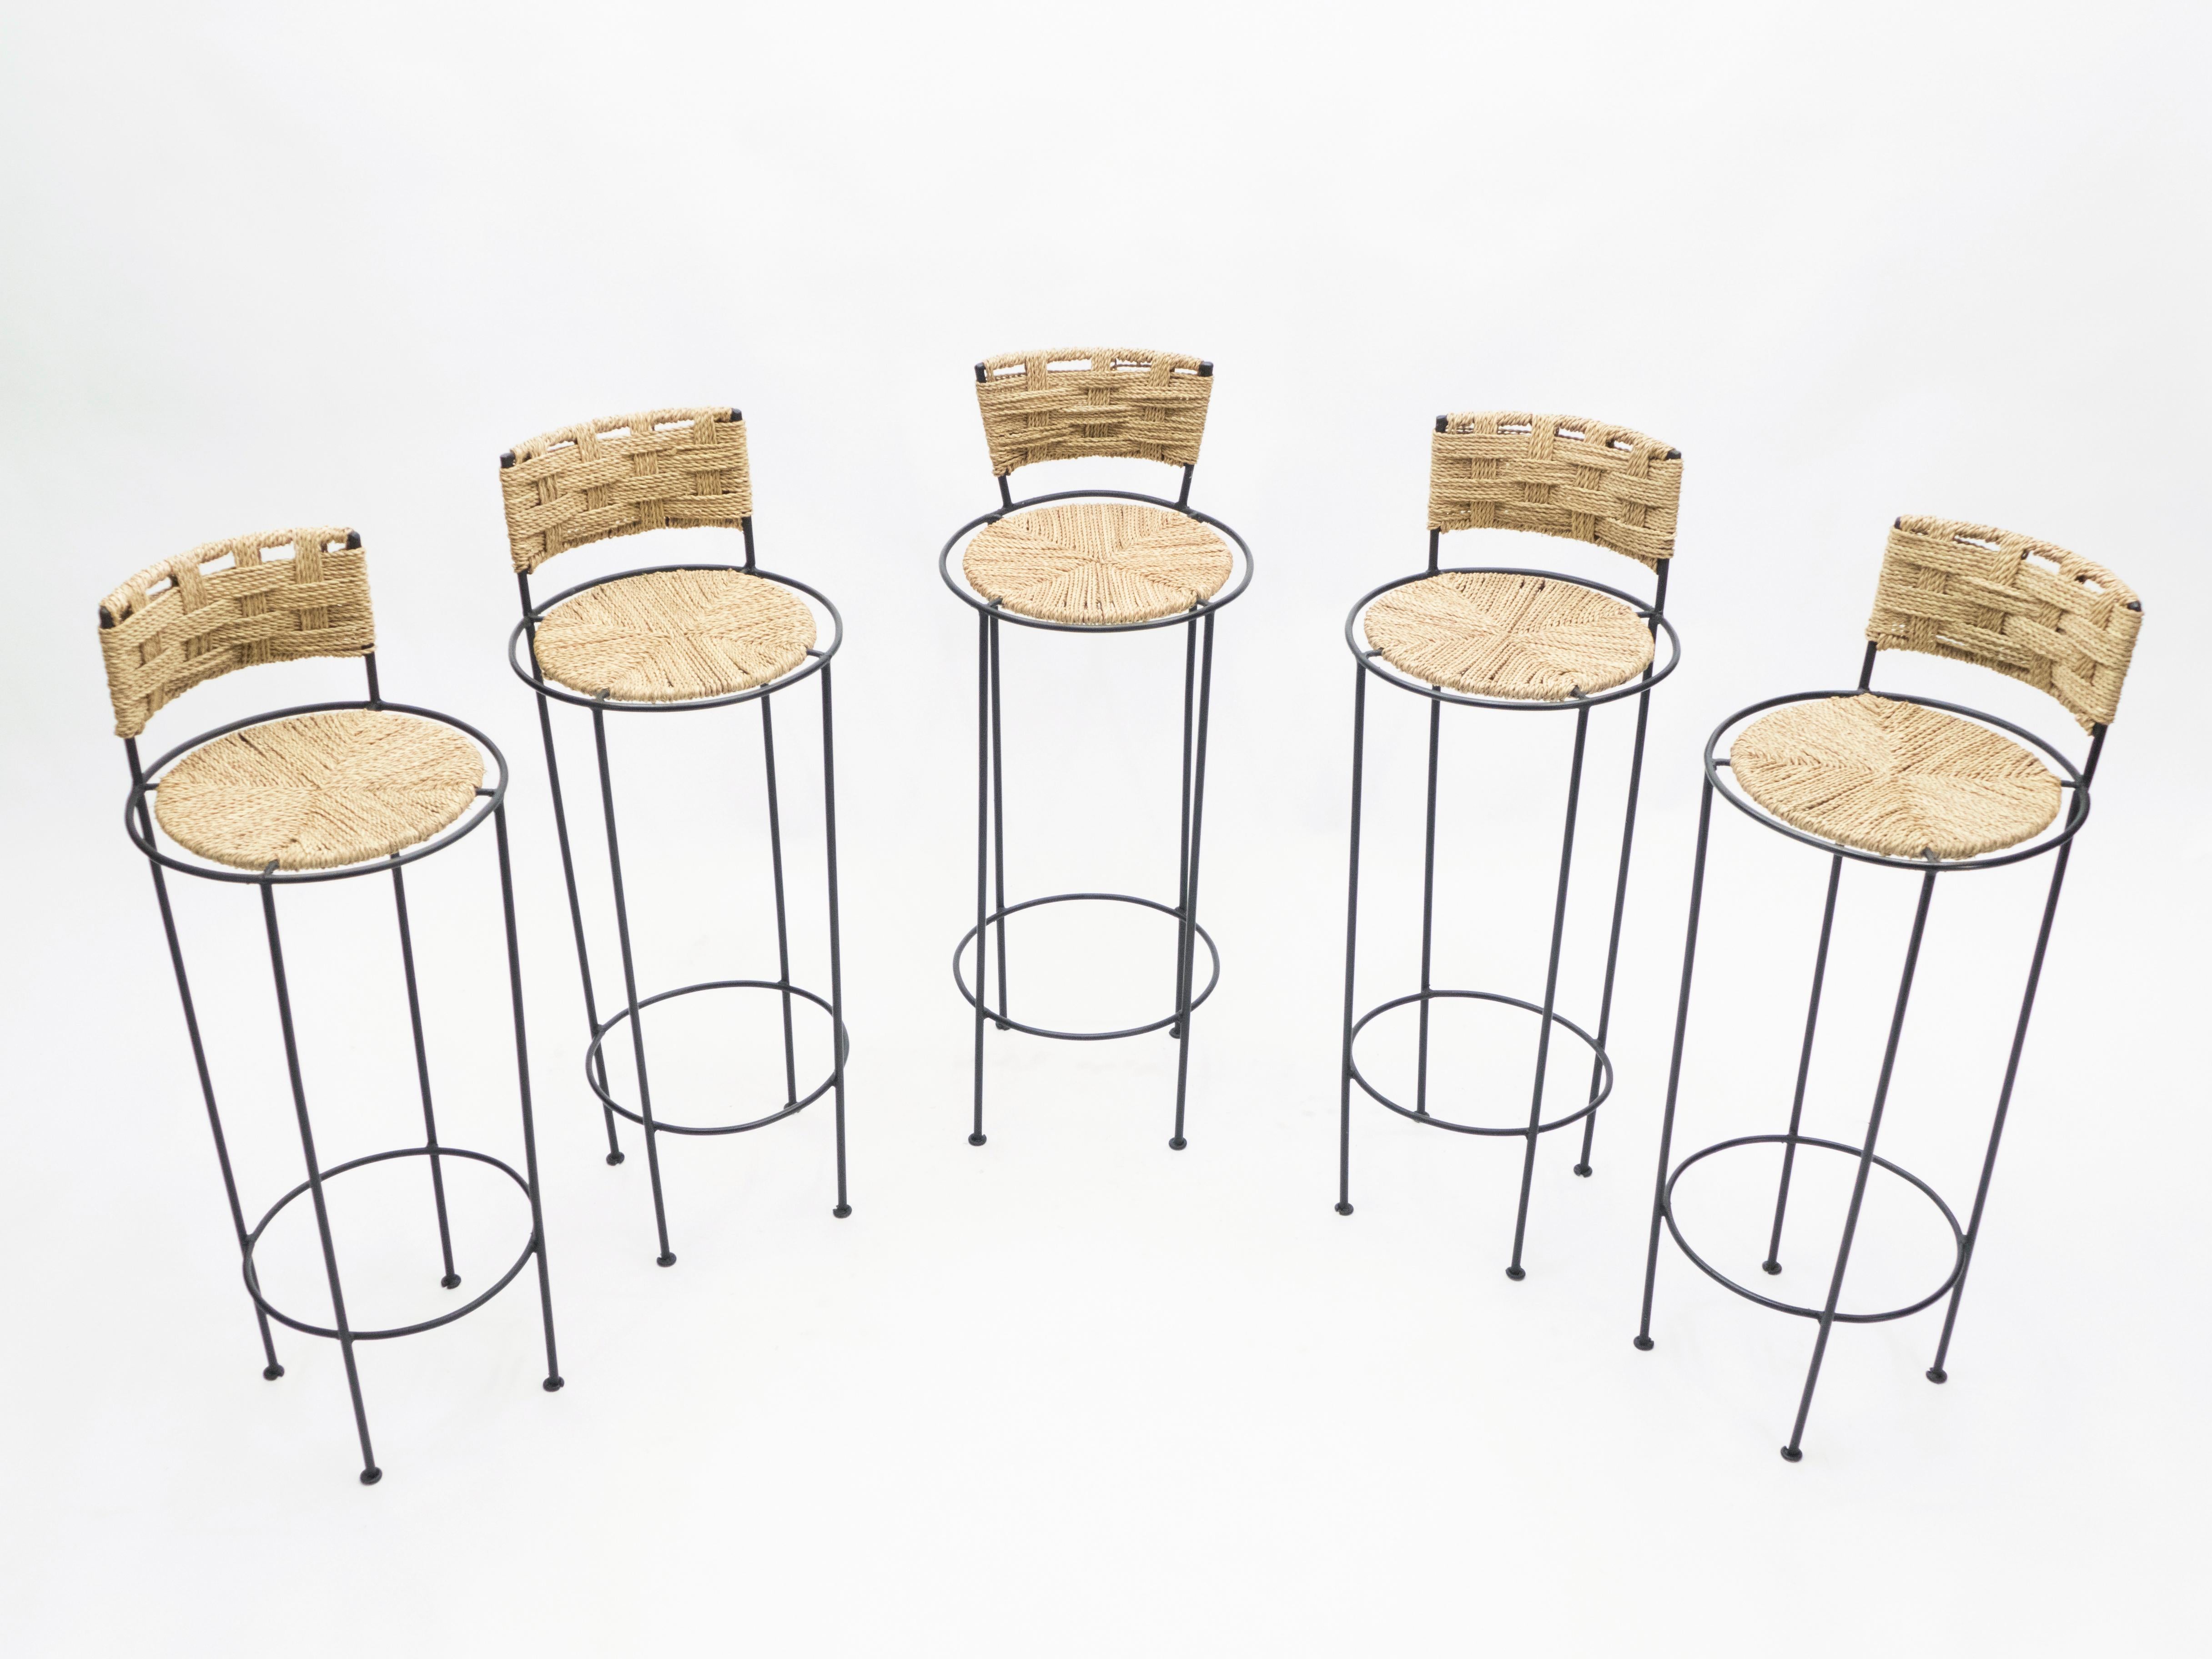 Beautiful patina is evident along the abaca rope seating and backrest of this set of five bar stools by Adrien Audoux et Frida Minet, giving away their vintage status. This natural style is typical of the French design of Audoux-Minet. Timeless